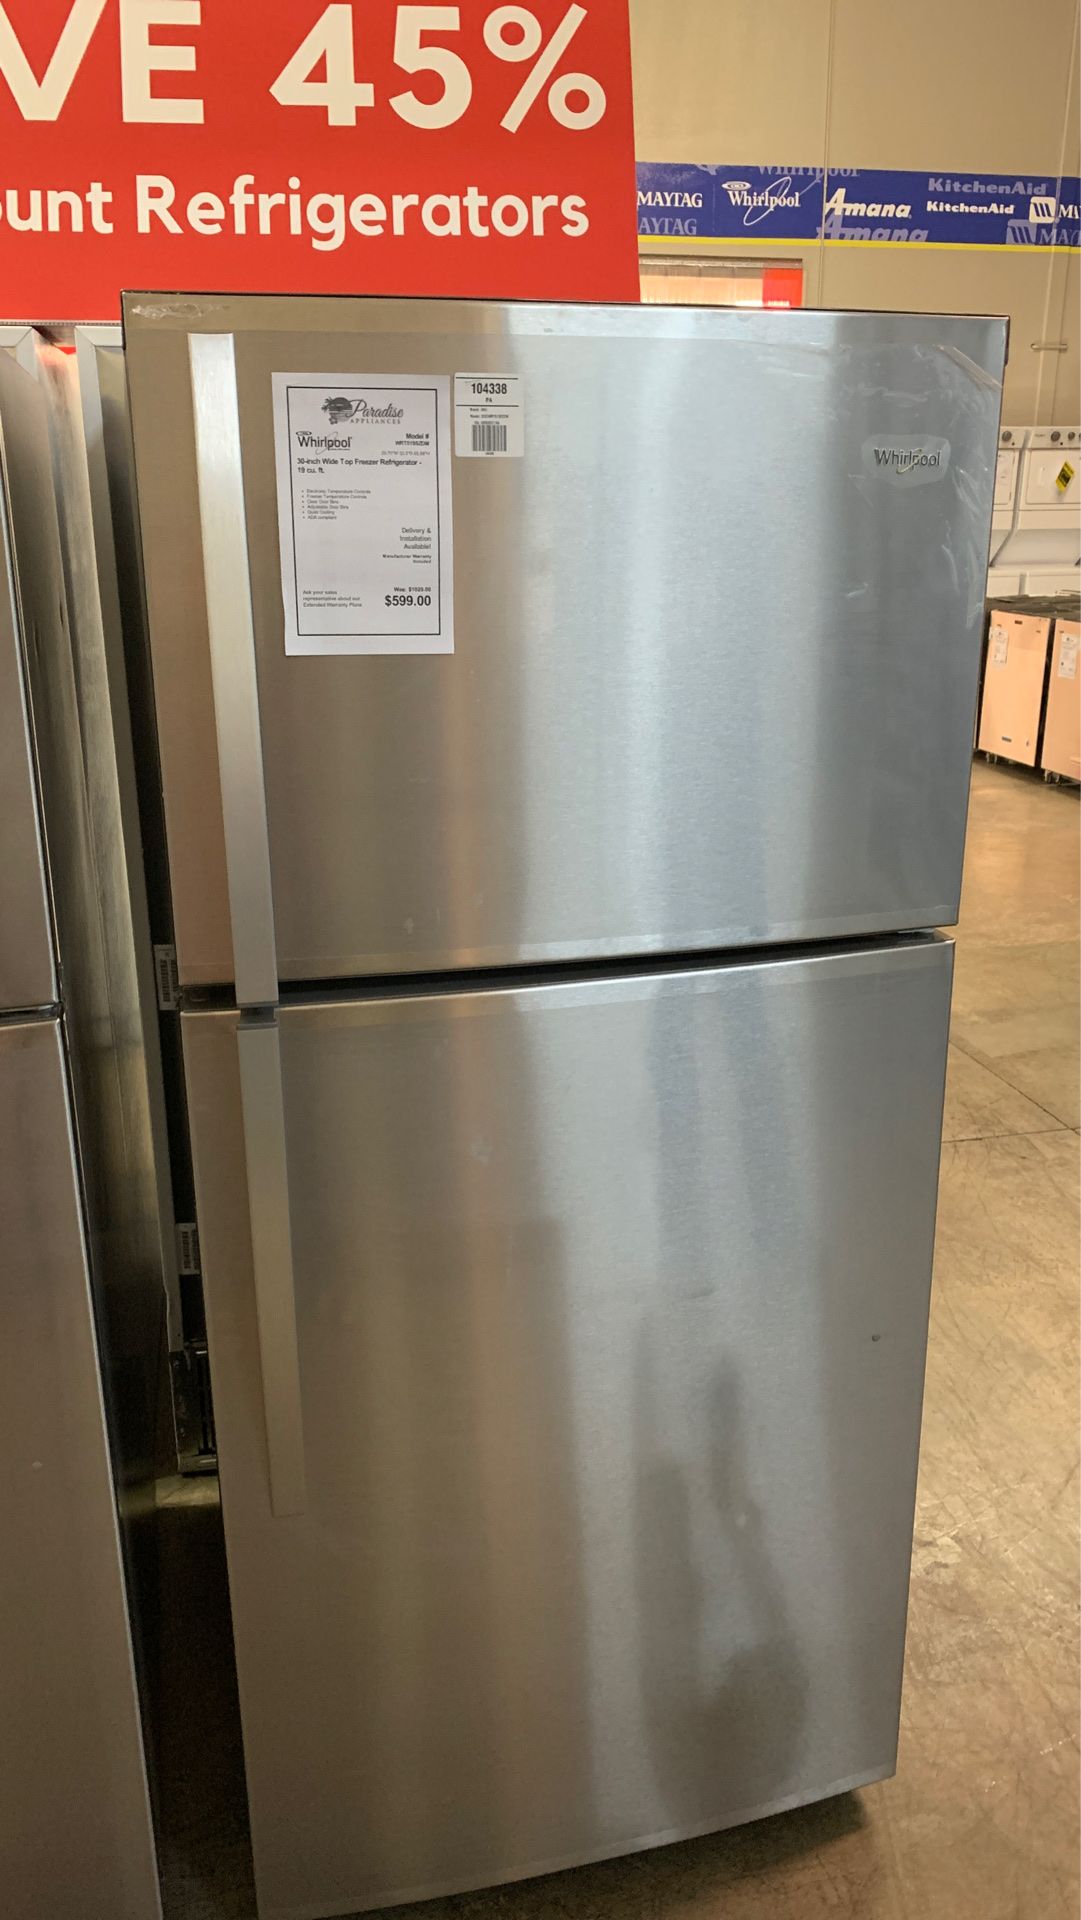 Brand New! Whirlpool Stainless Steel Top Mount Refrigerator!!